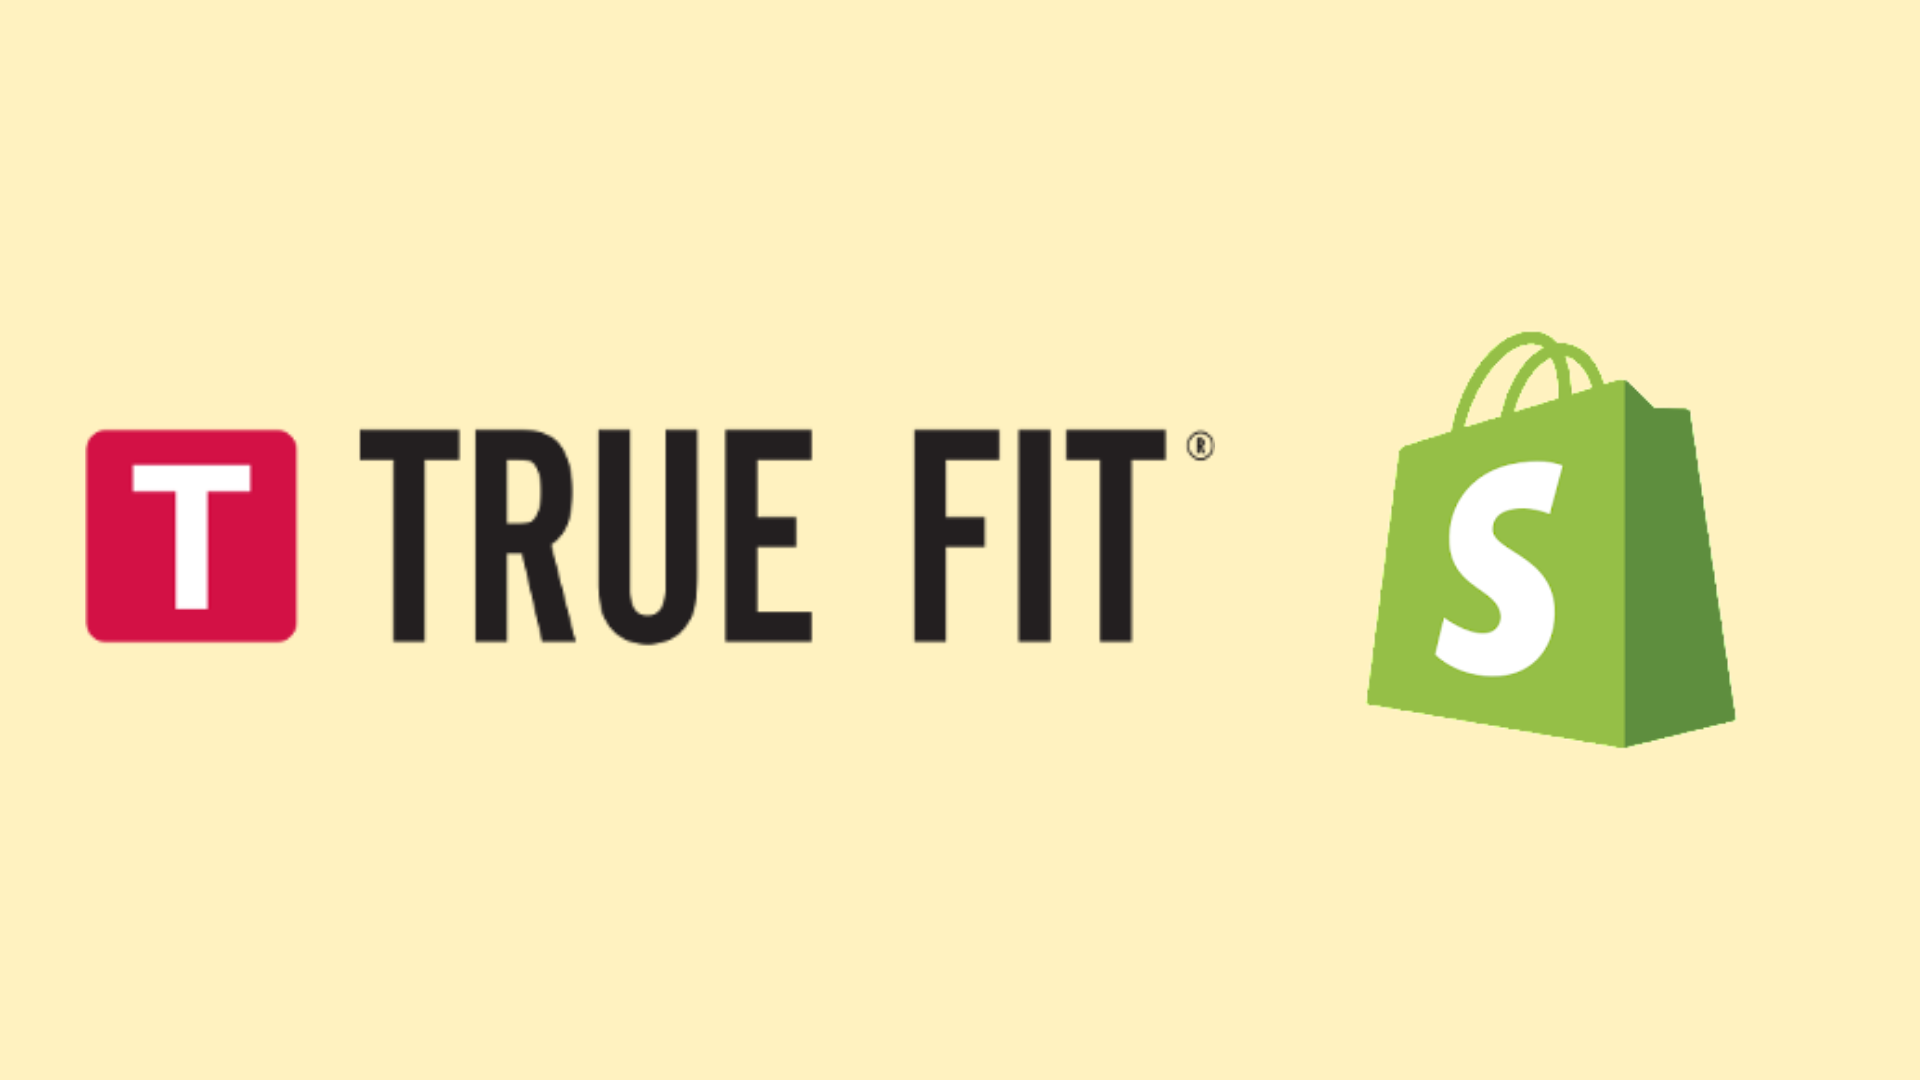 True Fit and Shopify Forge AI-powered Partnership for Apparel Revolution!